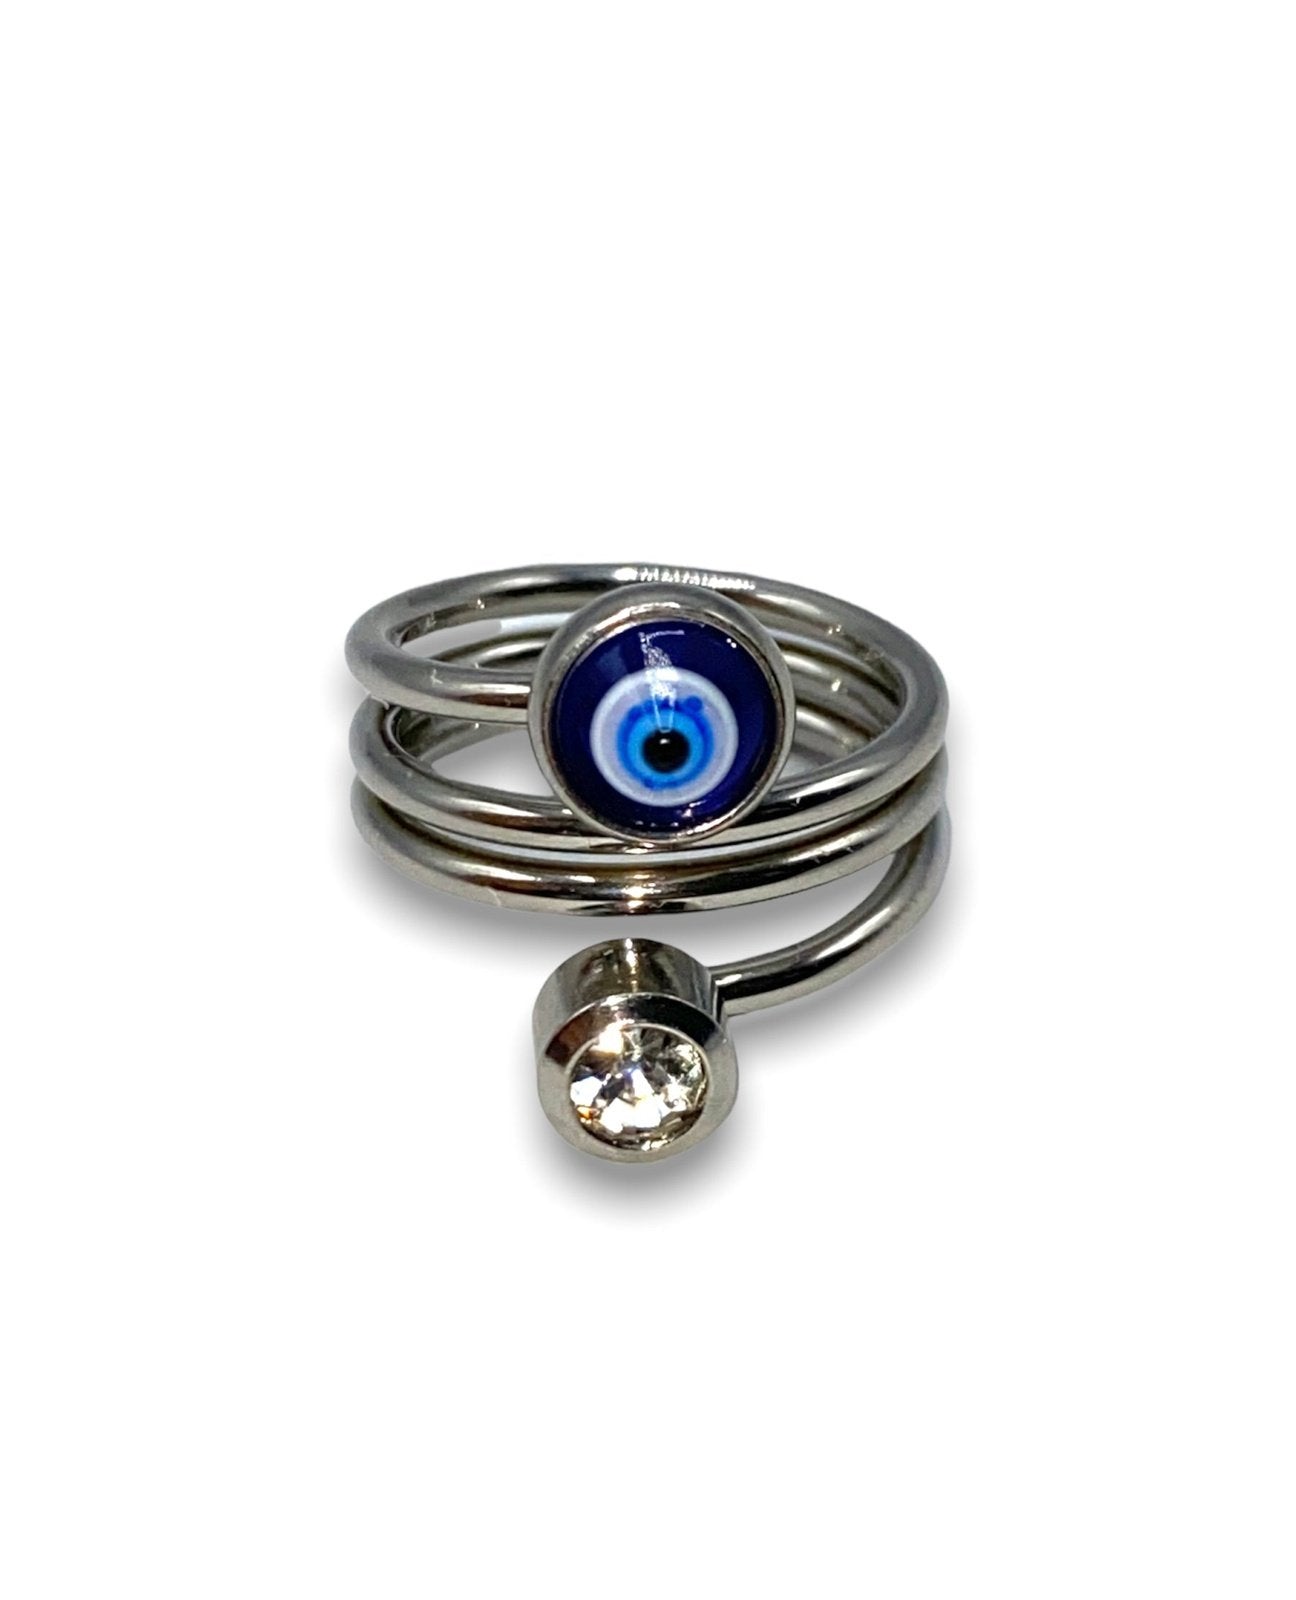 Stylish Stainless Steel Evil Eye Spiral Ring for Protection